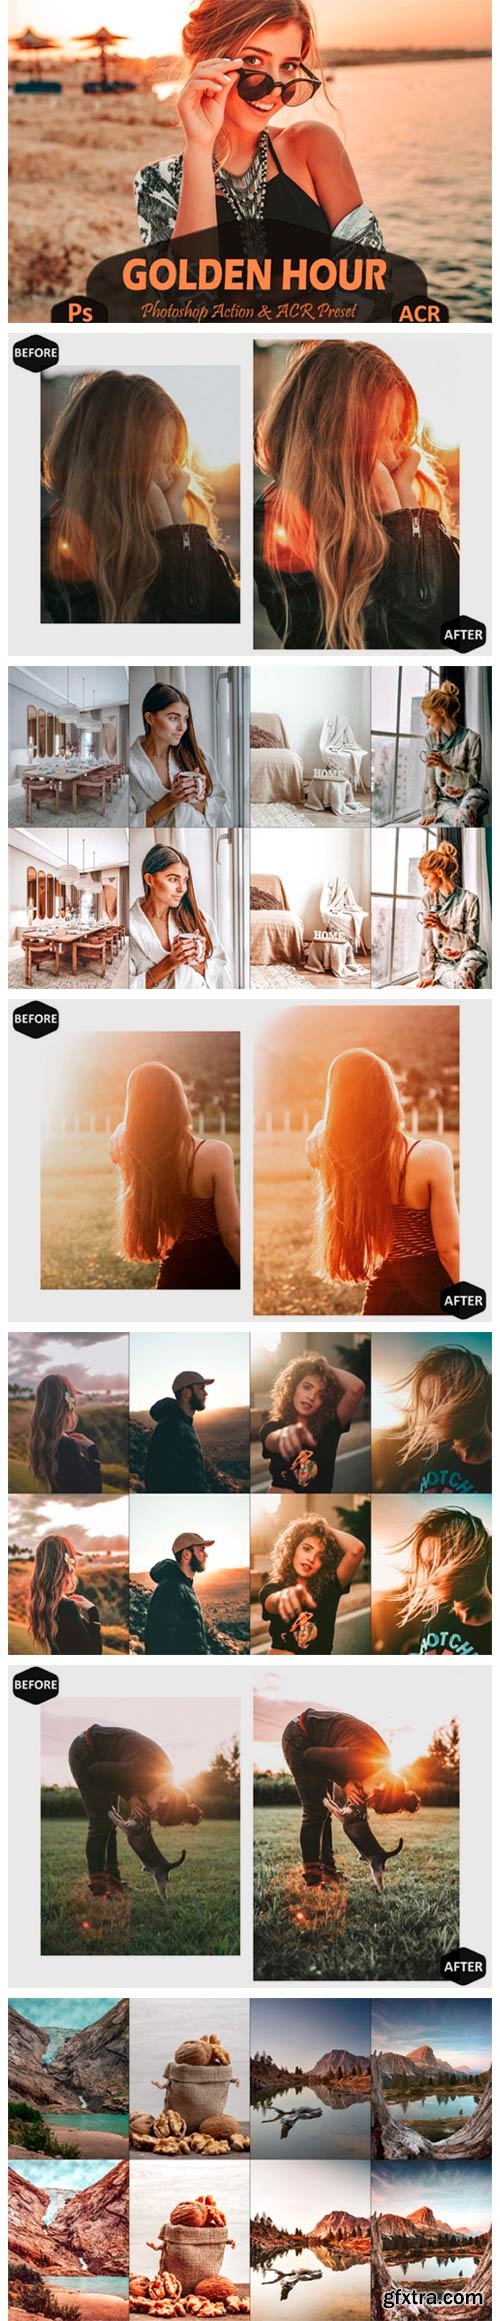 10 Golden Hour Photoshop Actions and ACR 7099653